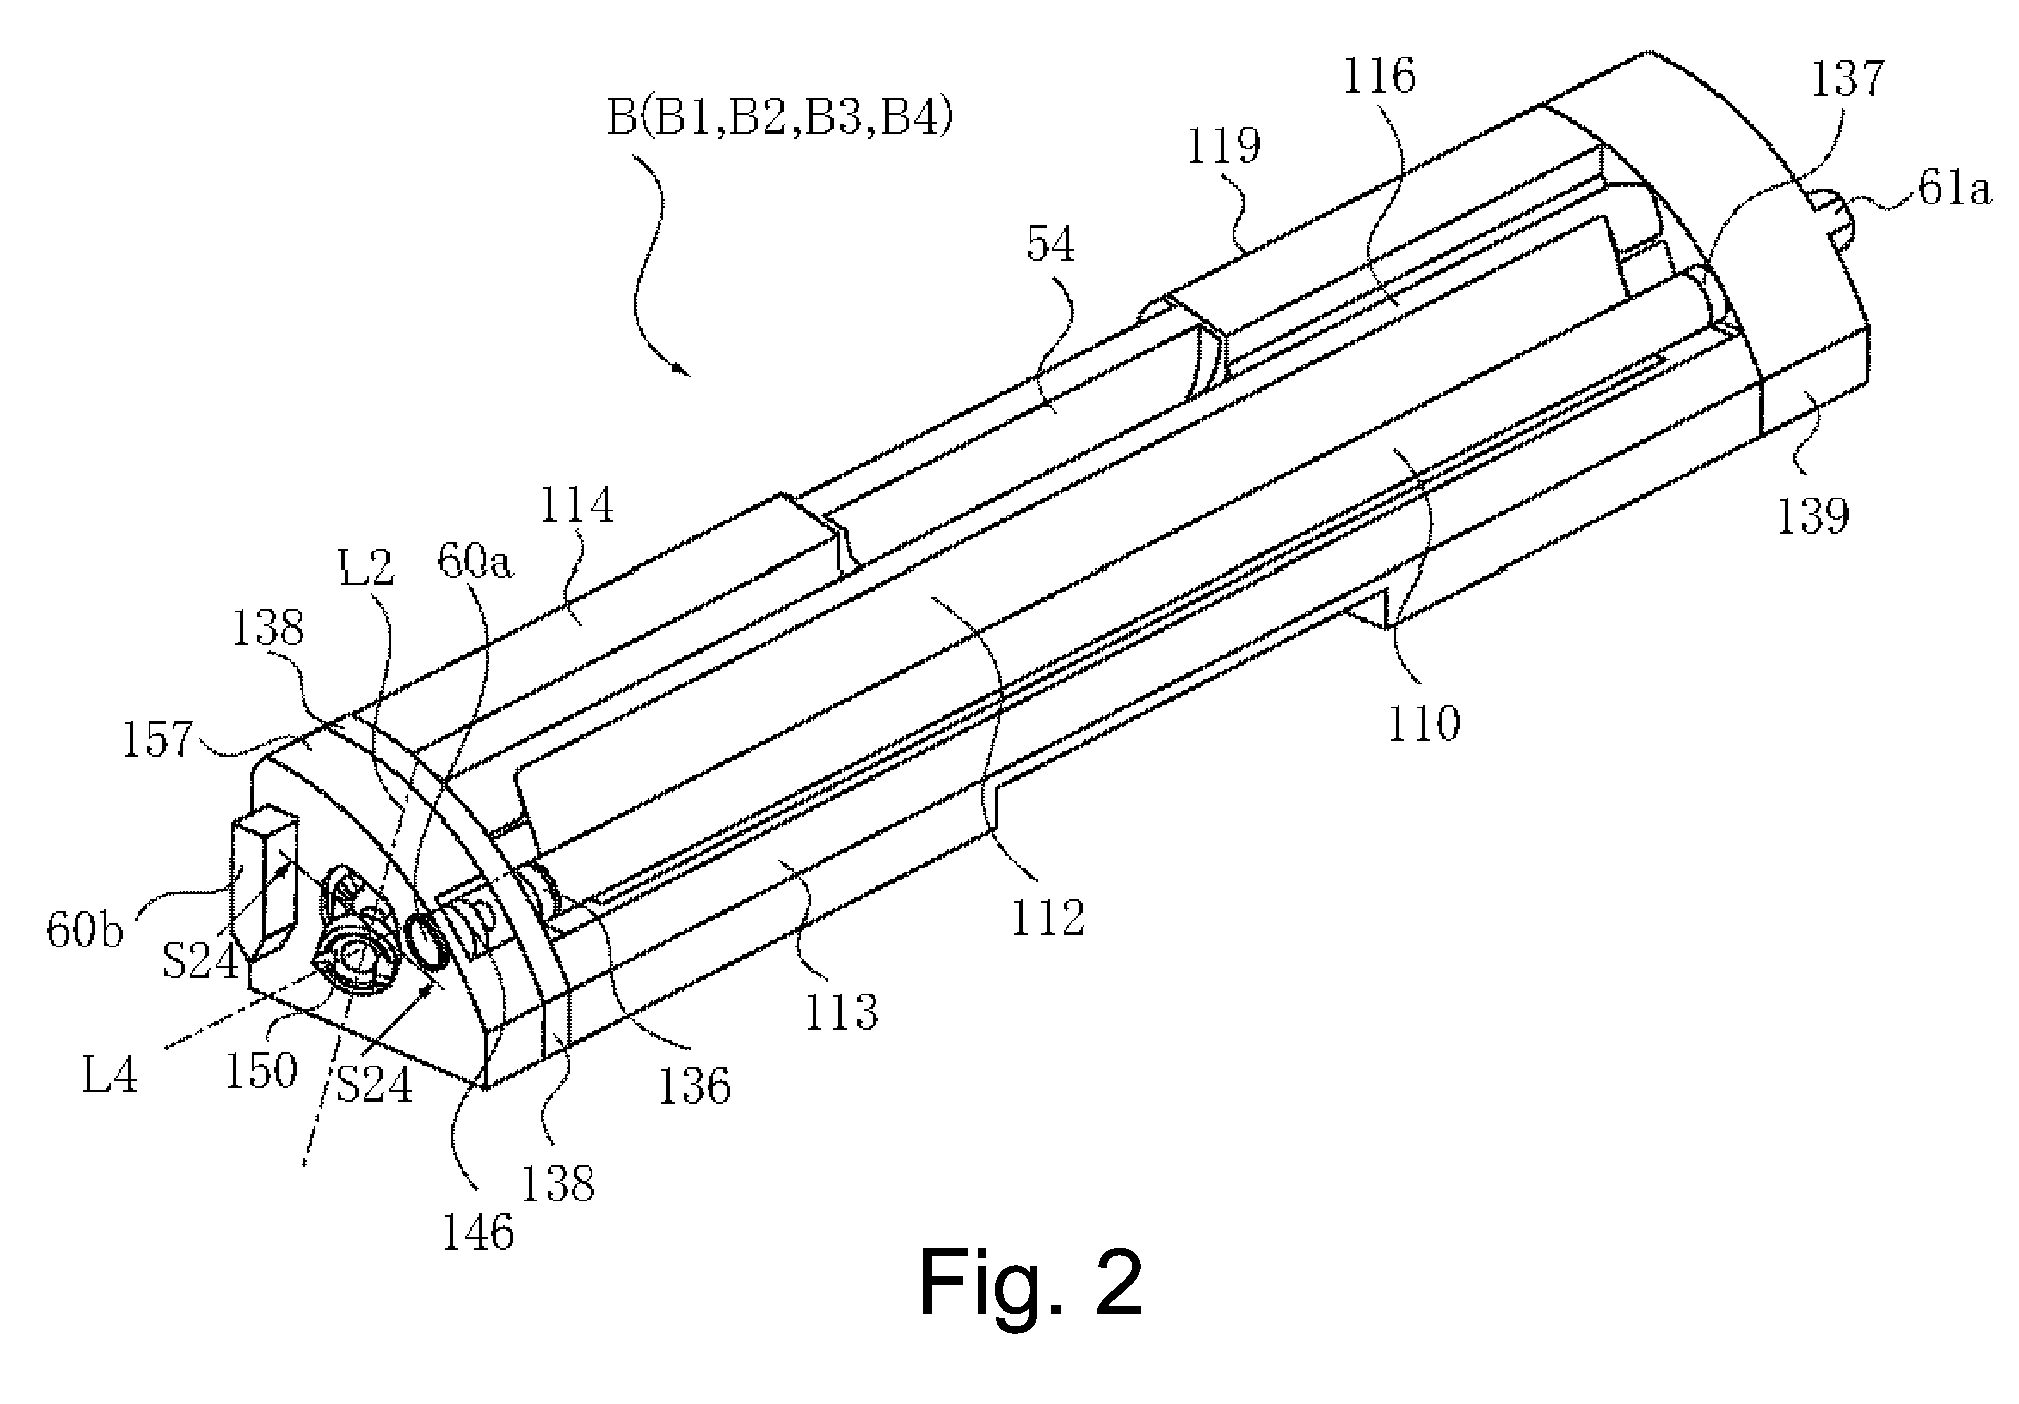 Developing device having movable coupling member for engagement to electrophotographic image forming apparatus